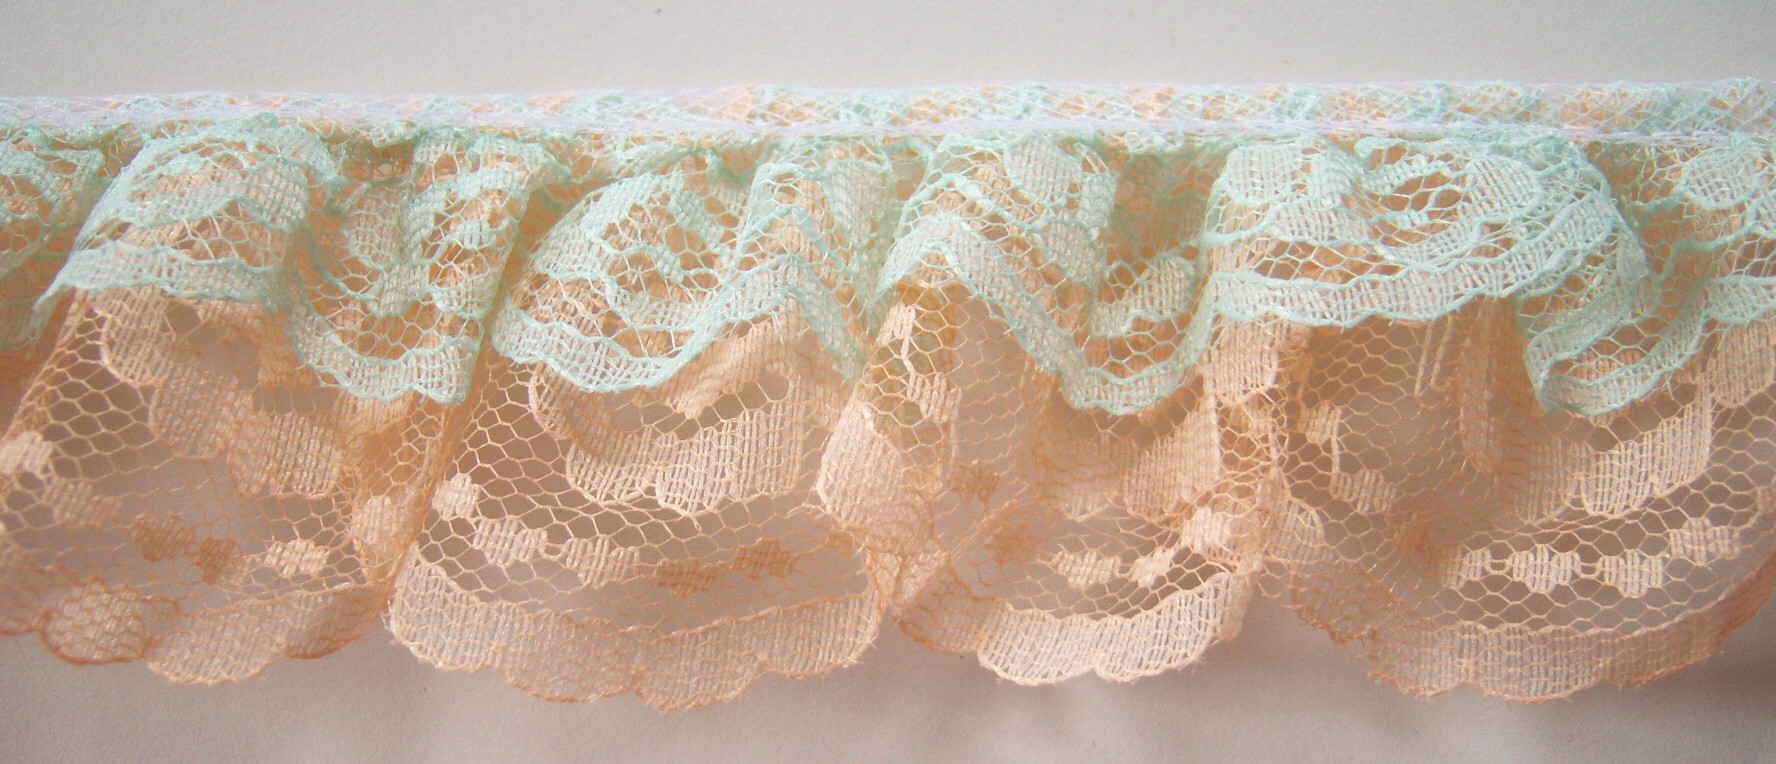 Lt Mint/Peach Double Gathered Lace